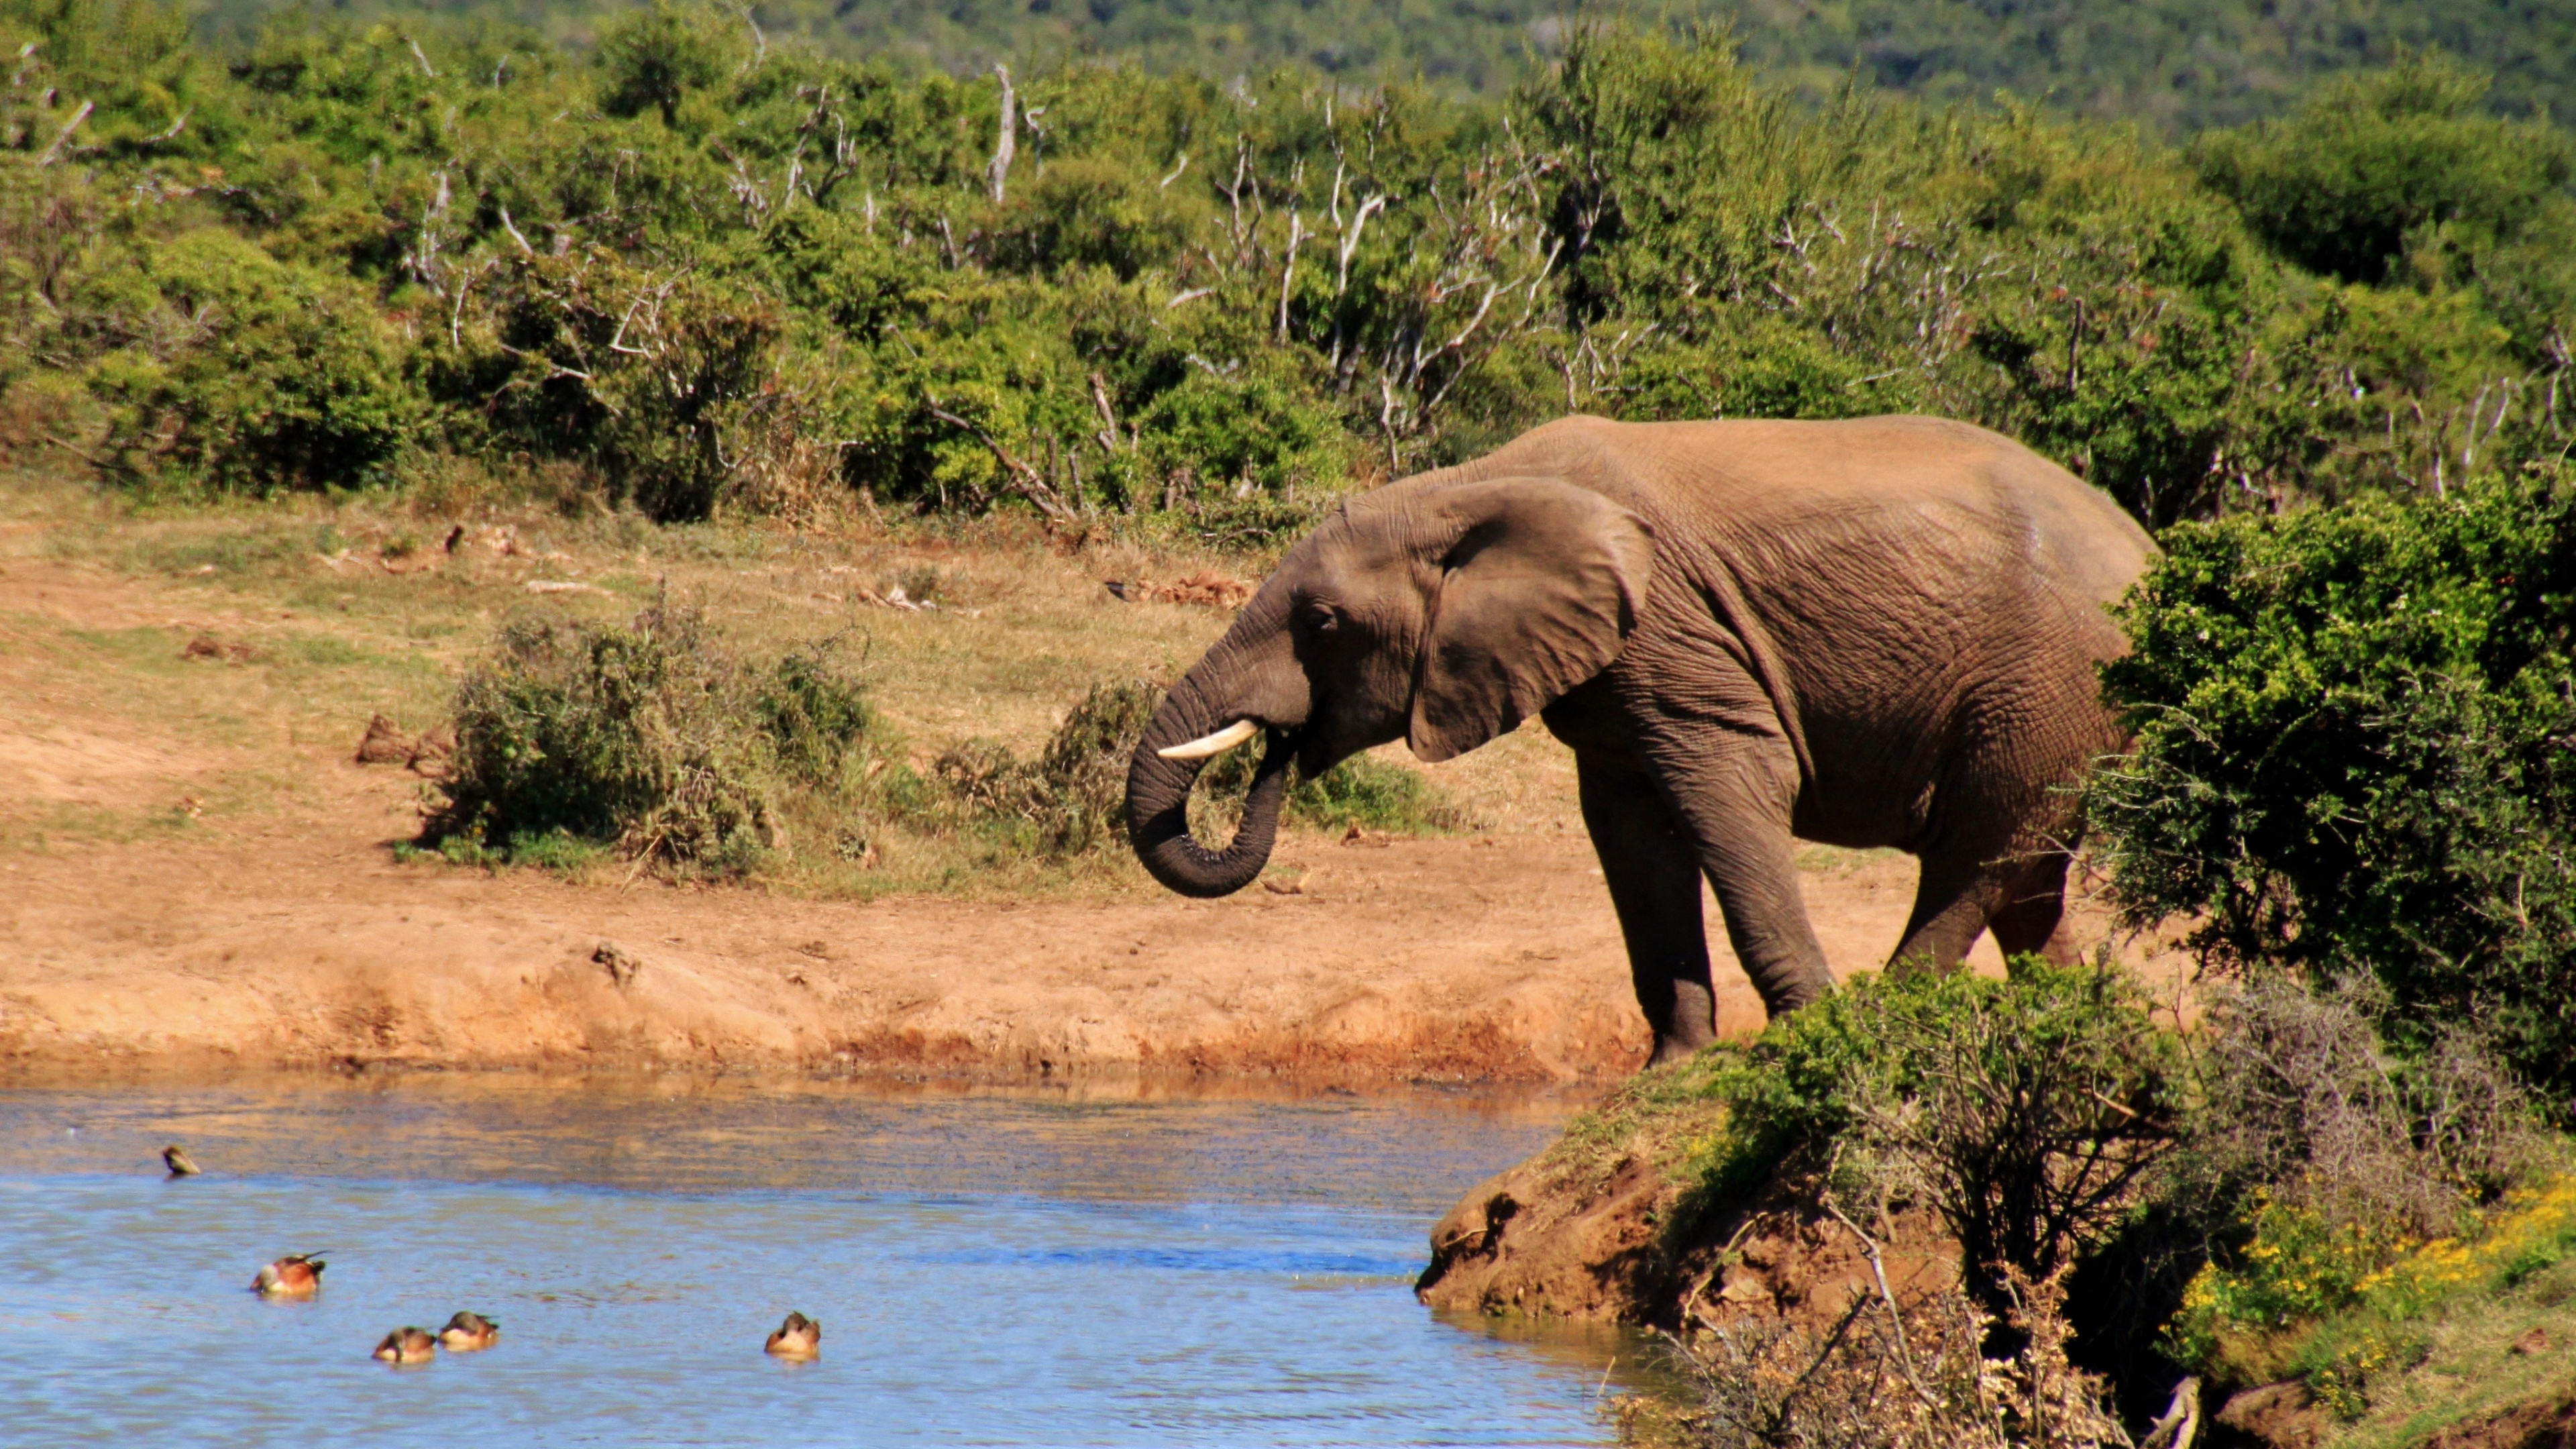 Elephant Drinking Water on River During Daytime. Wallpaper in 3840x2160 Resolution